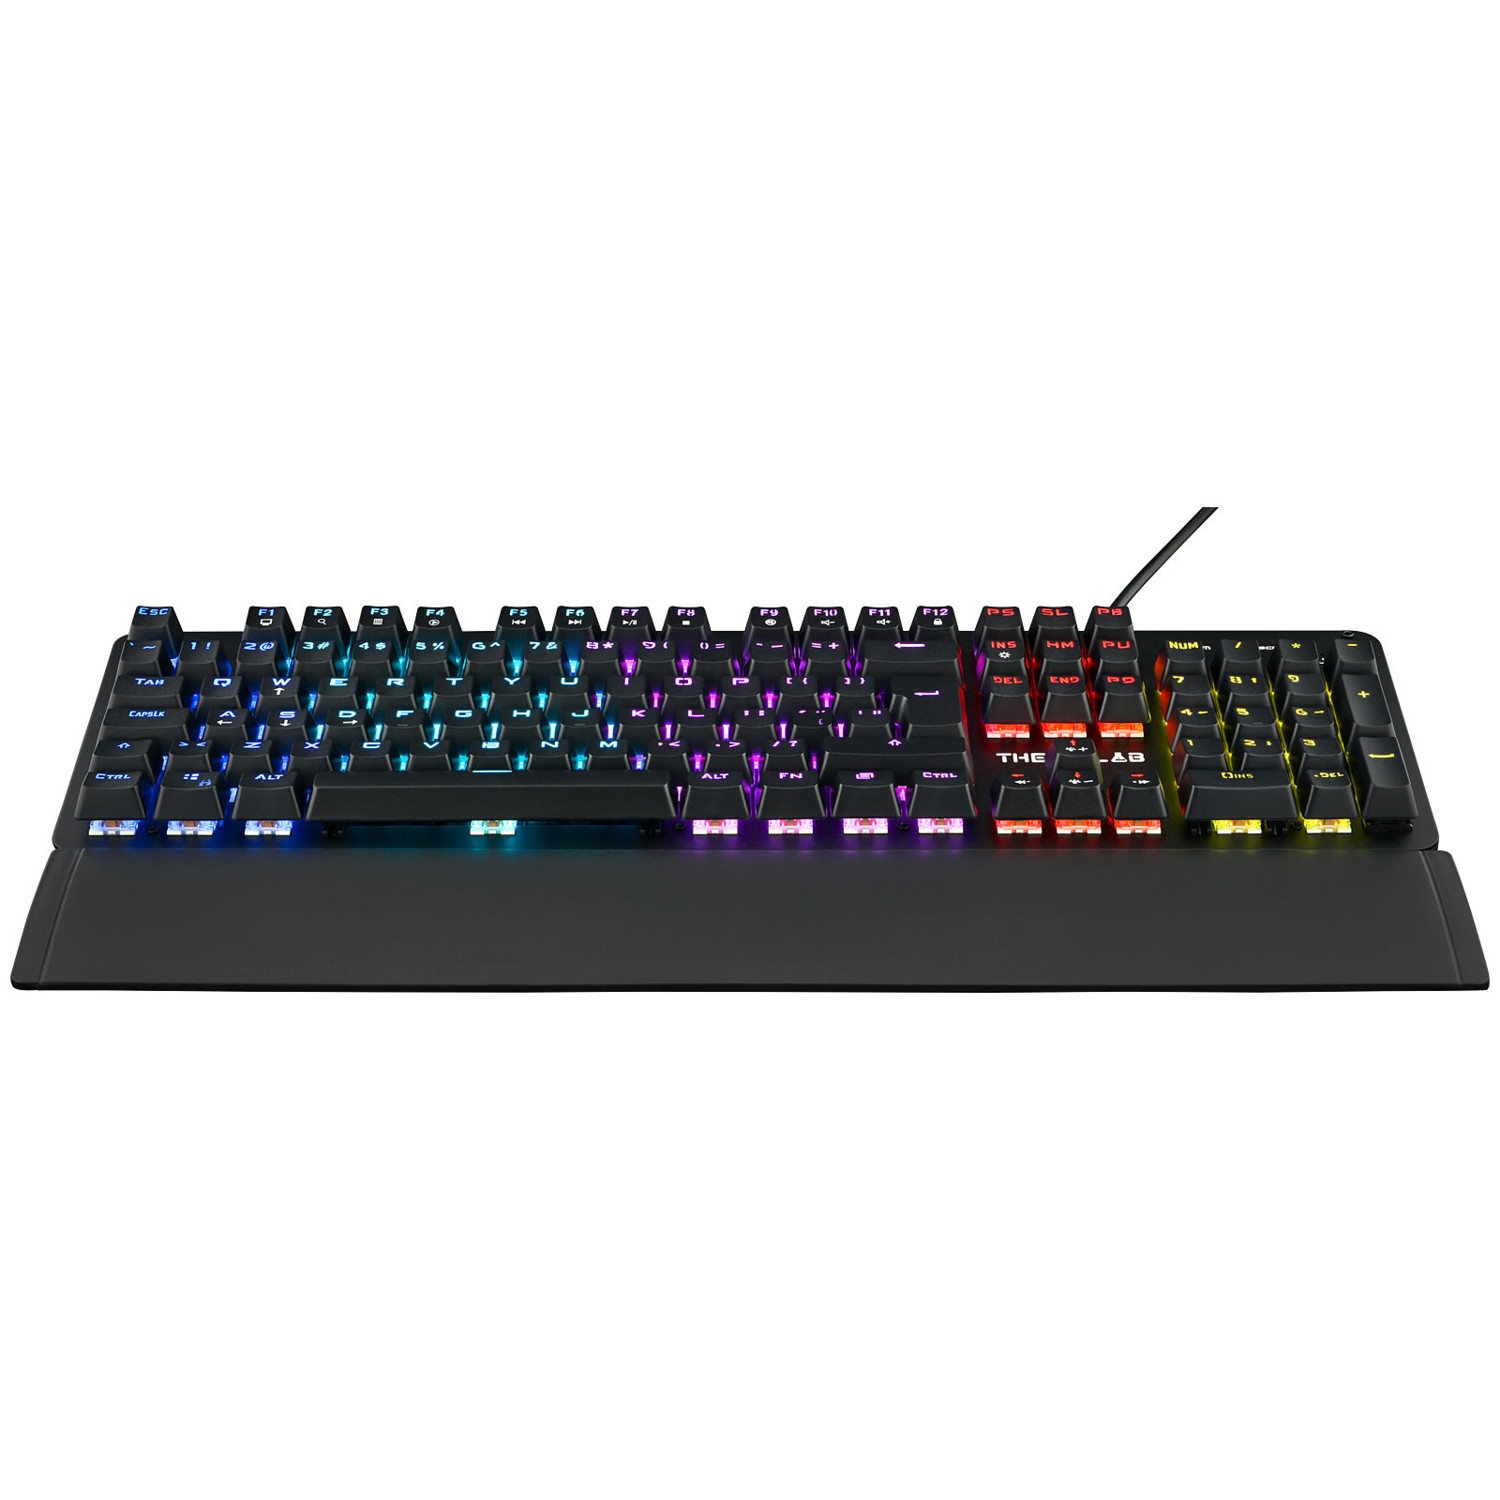 Clavier The G-Lab Keyz Carbon-E, Claviers Gaming